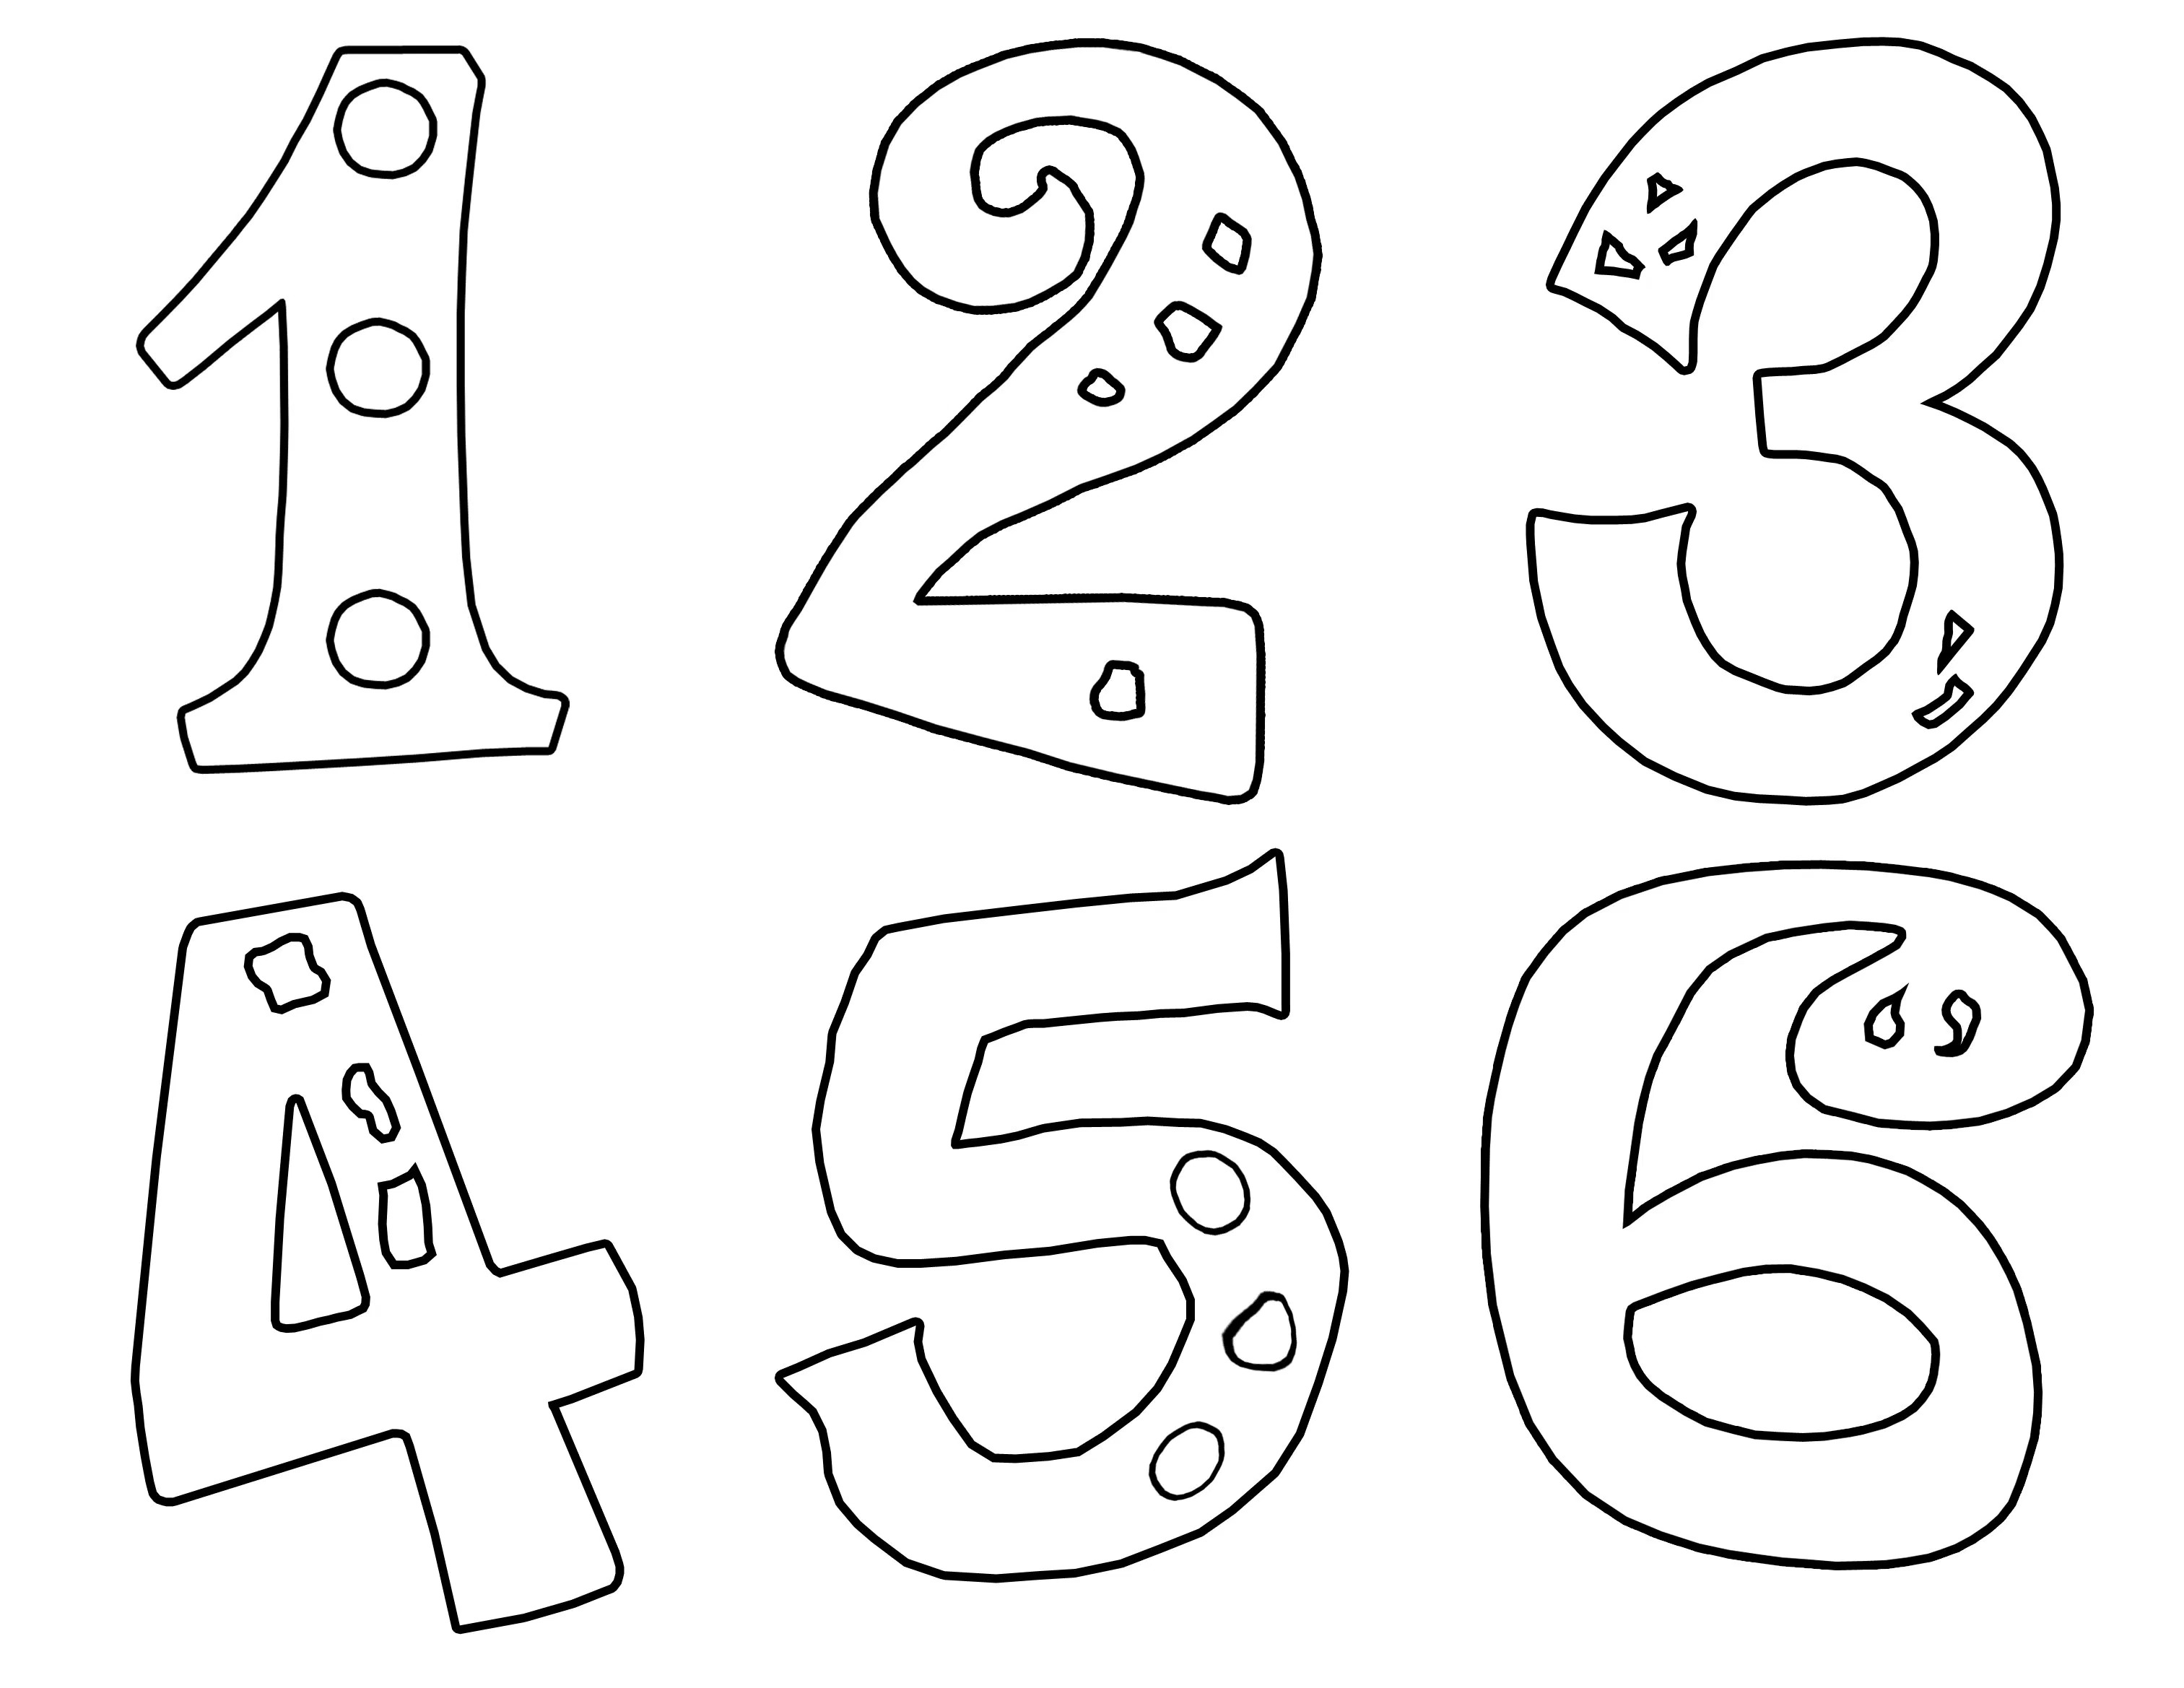 Number Coded Coloring Pages at GetColorings.com | Free printable